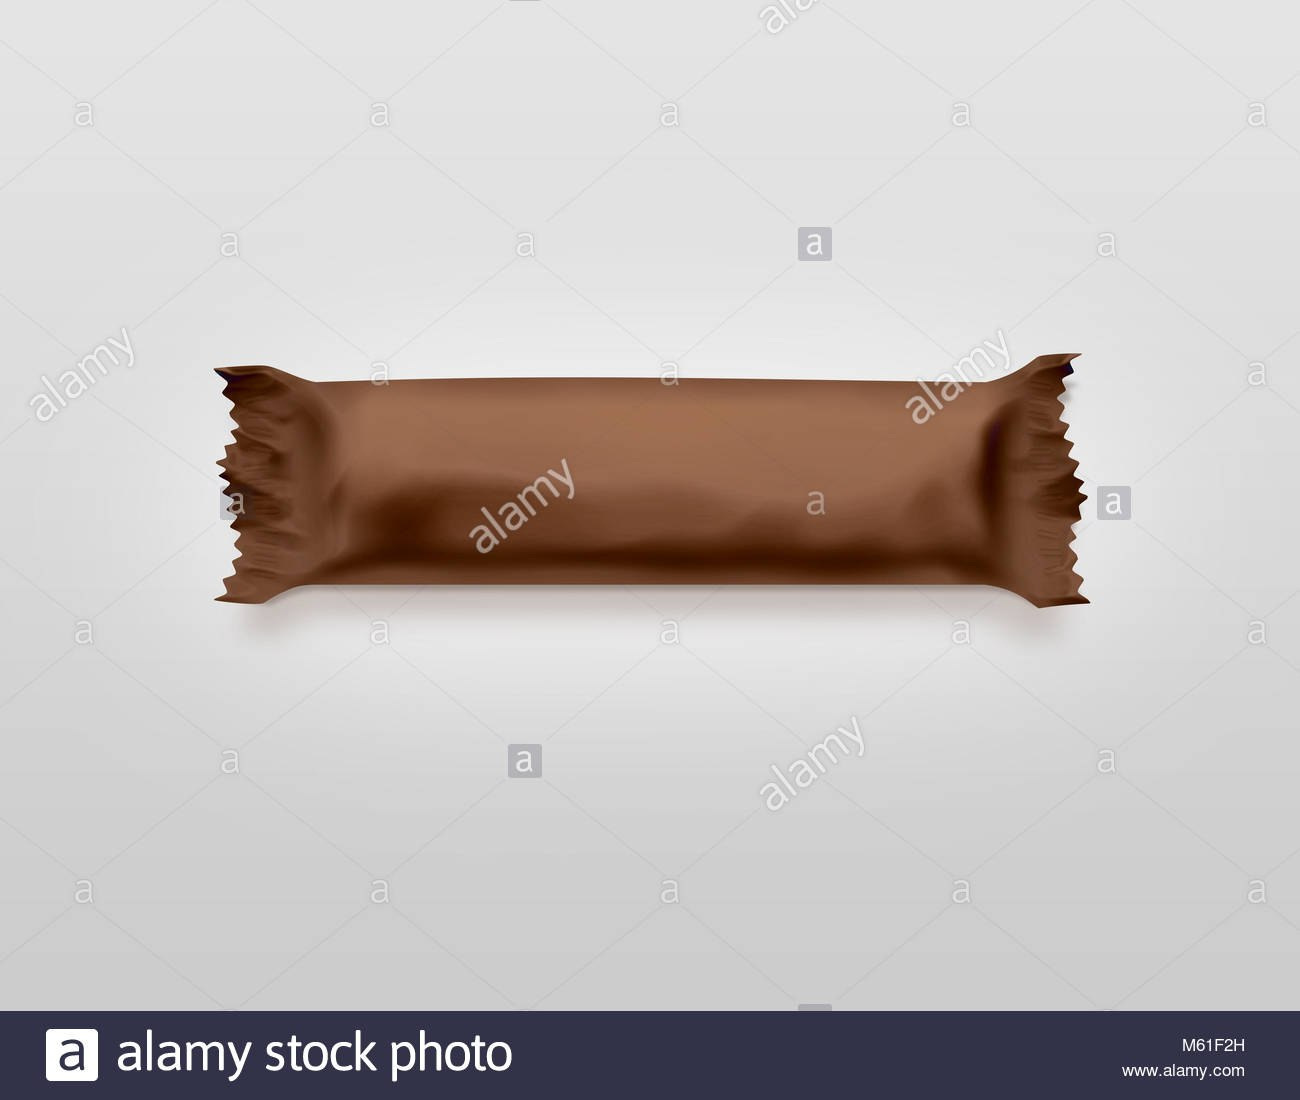 Blank Brown Candy Bar Plastic Wrap Mockup Isolated Empty Chocolate with regard to Blank Candy Bar Wrapper Template